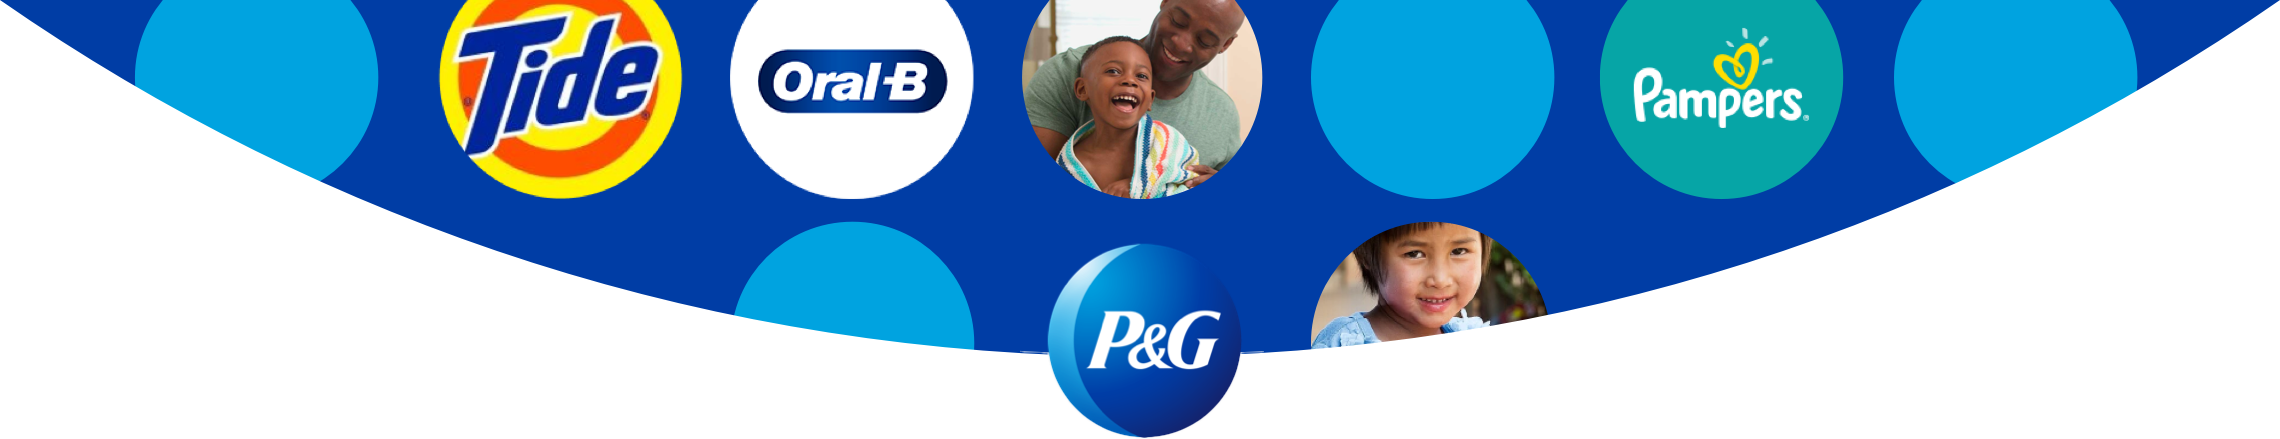 P&g live chat